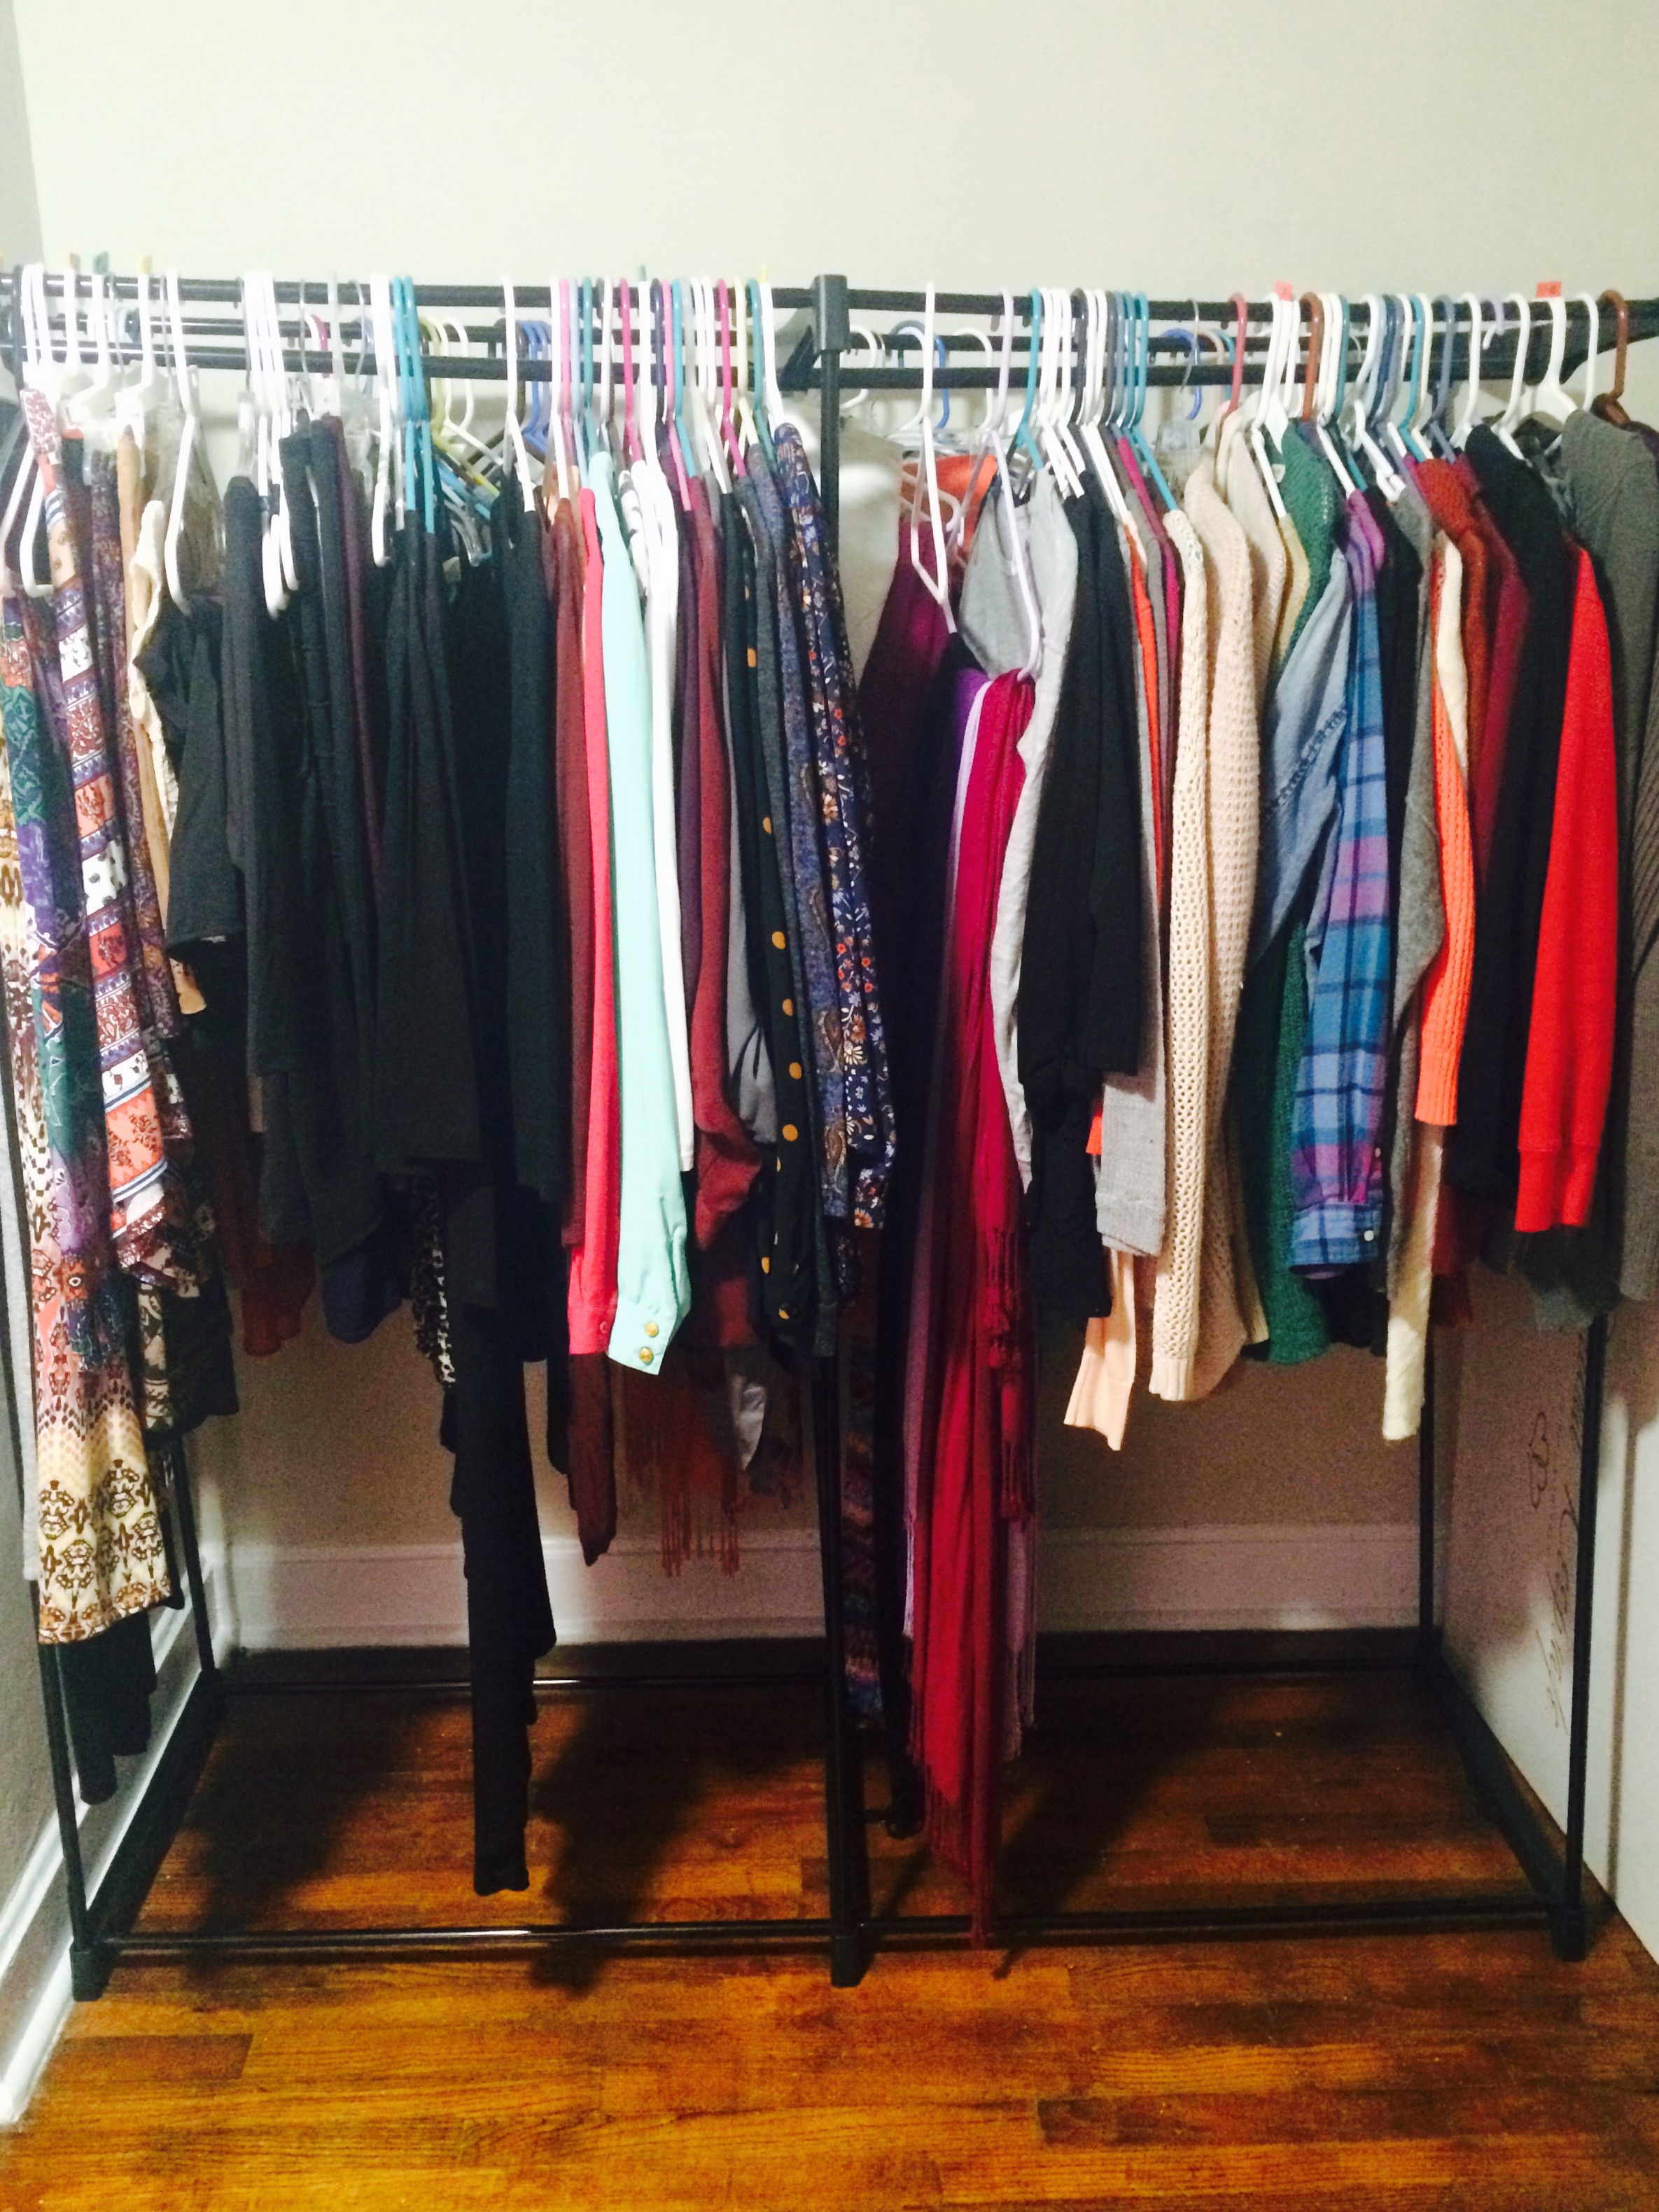 How to Keep Your Clothes Organized When You Have Little or No Closet Space